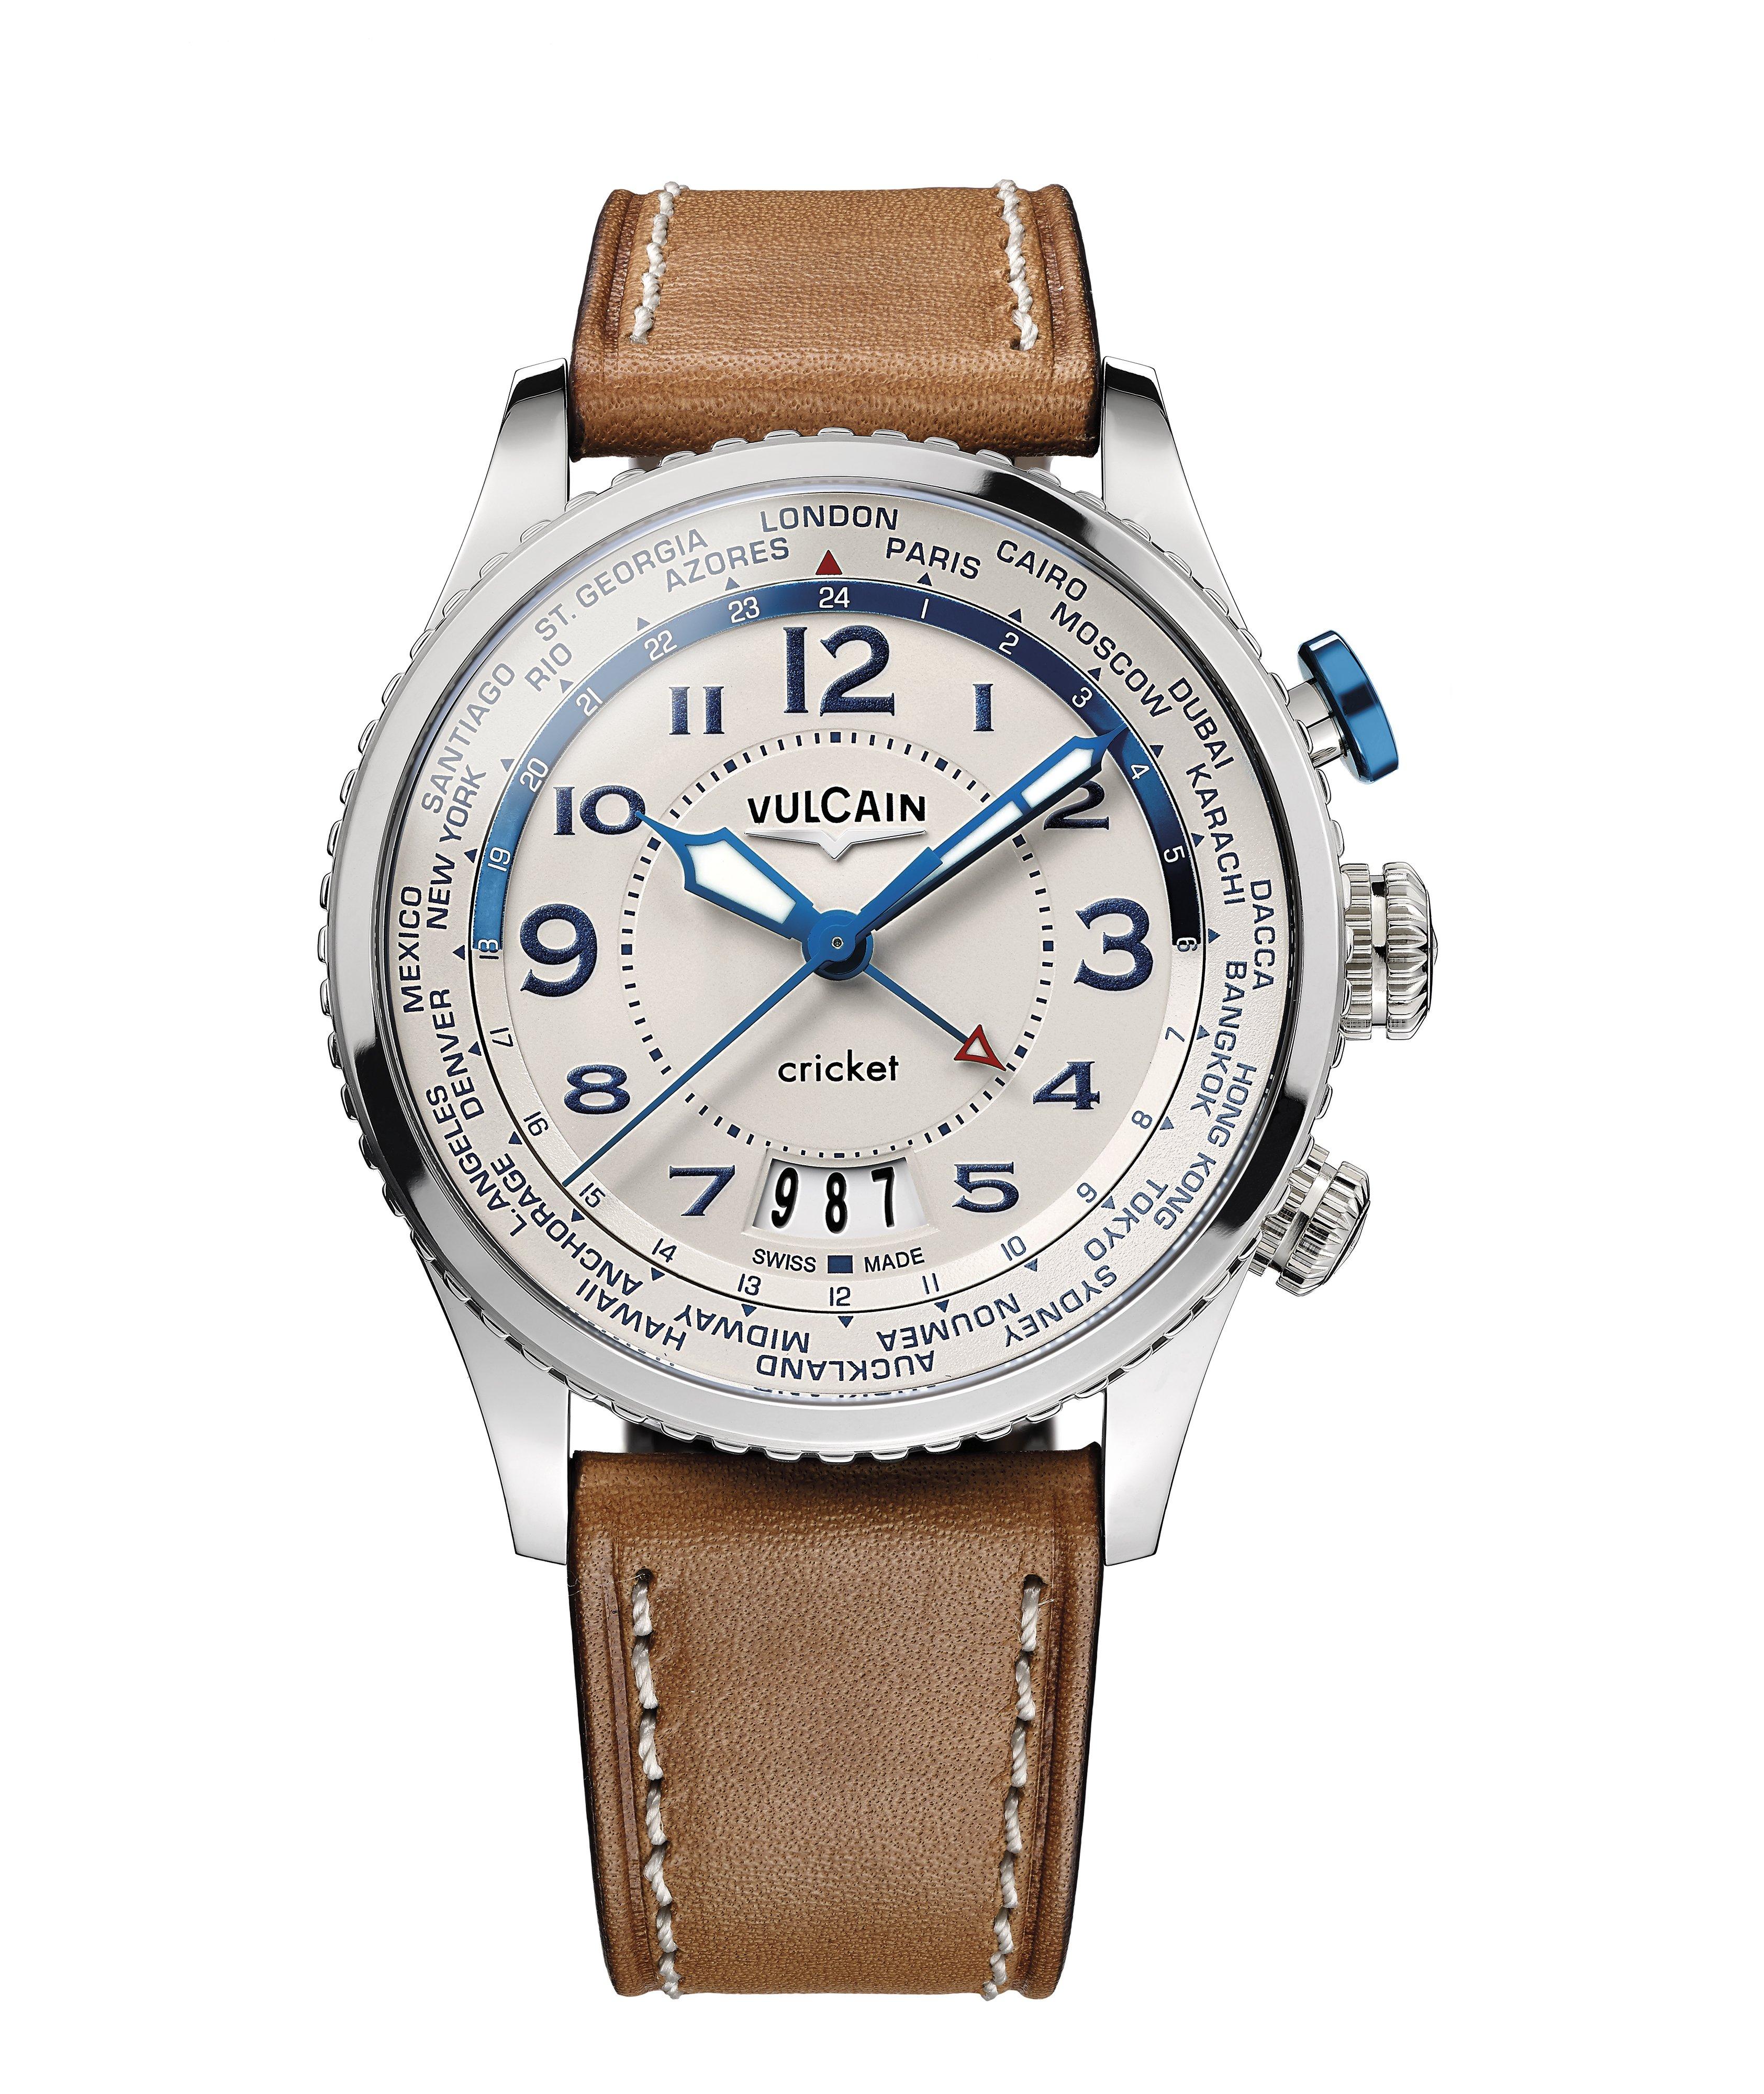 Montre, collection Aviator image 0